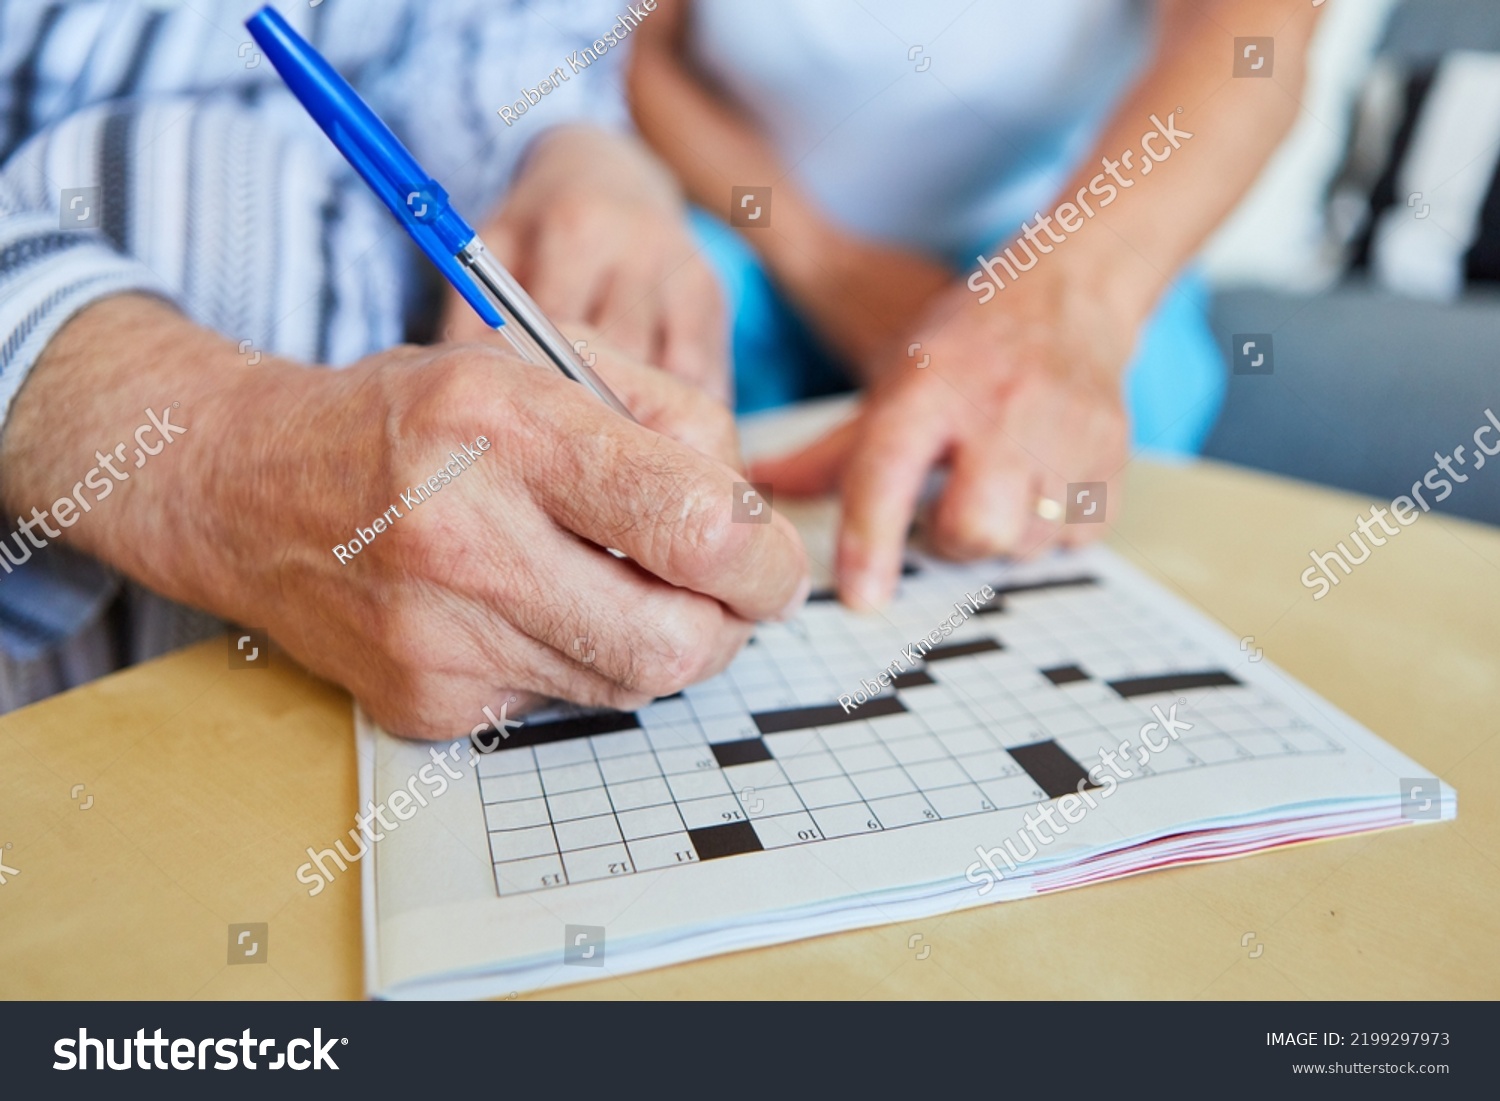 Two seniors do crossword puzzles at home or in a nursing home as memory training #2199297973